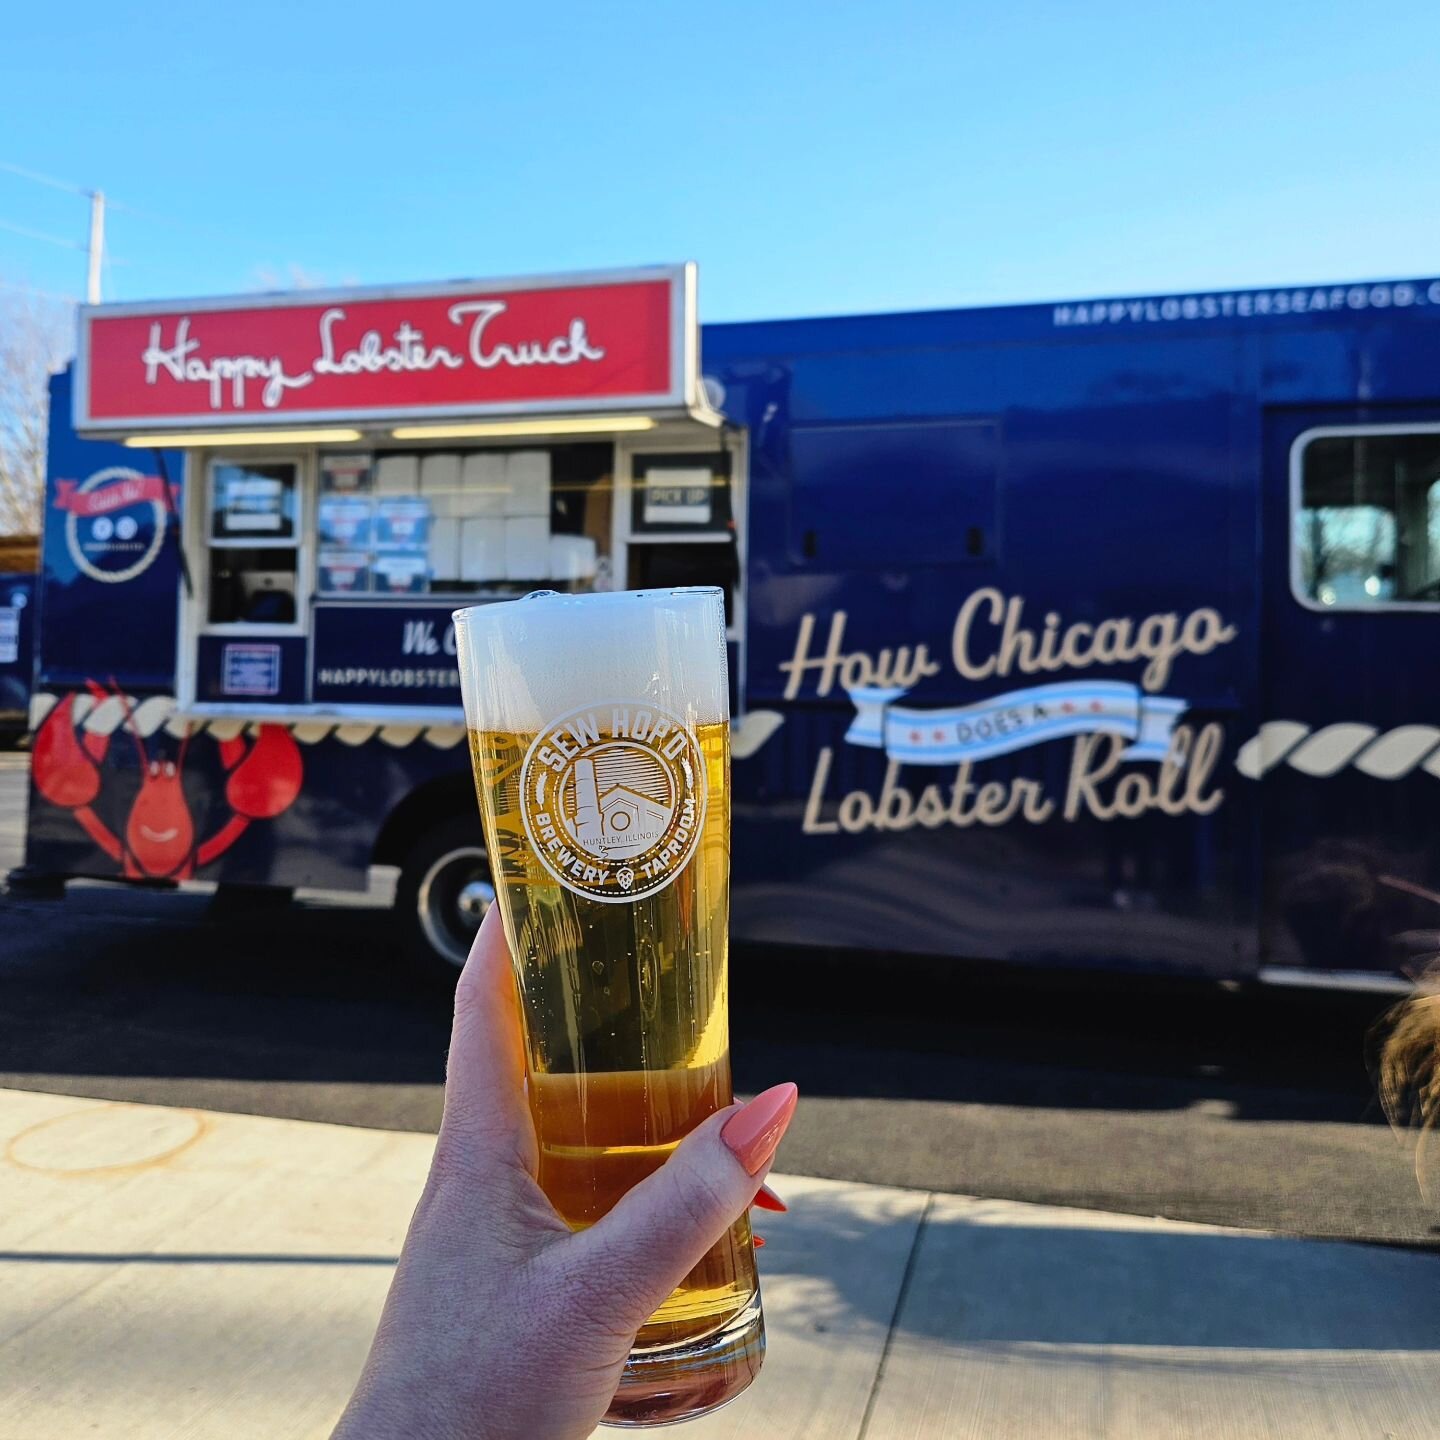 The Happy Lobster Truck returns to Sew Hop&rsquo;d for Thirsty Thursday from 5-8 pm. 

They'll have have ready-to-eat meals waiting for you during their walkup service, supplies will be limited and preordering is HIGHLY RECOMMENDED, so lock in your l